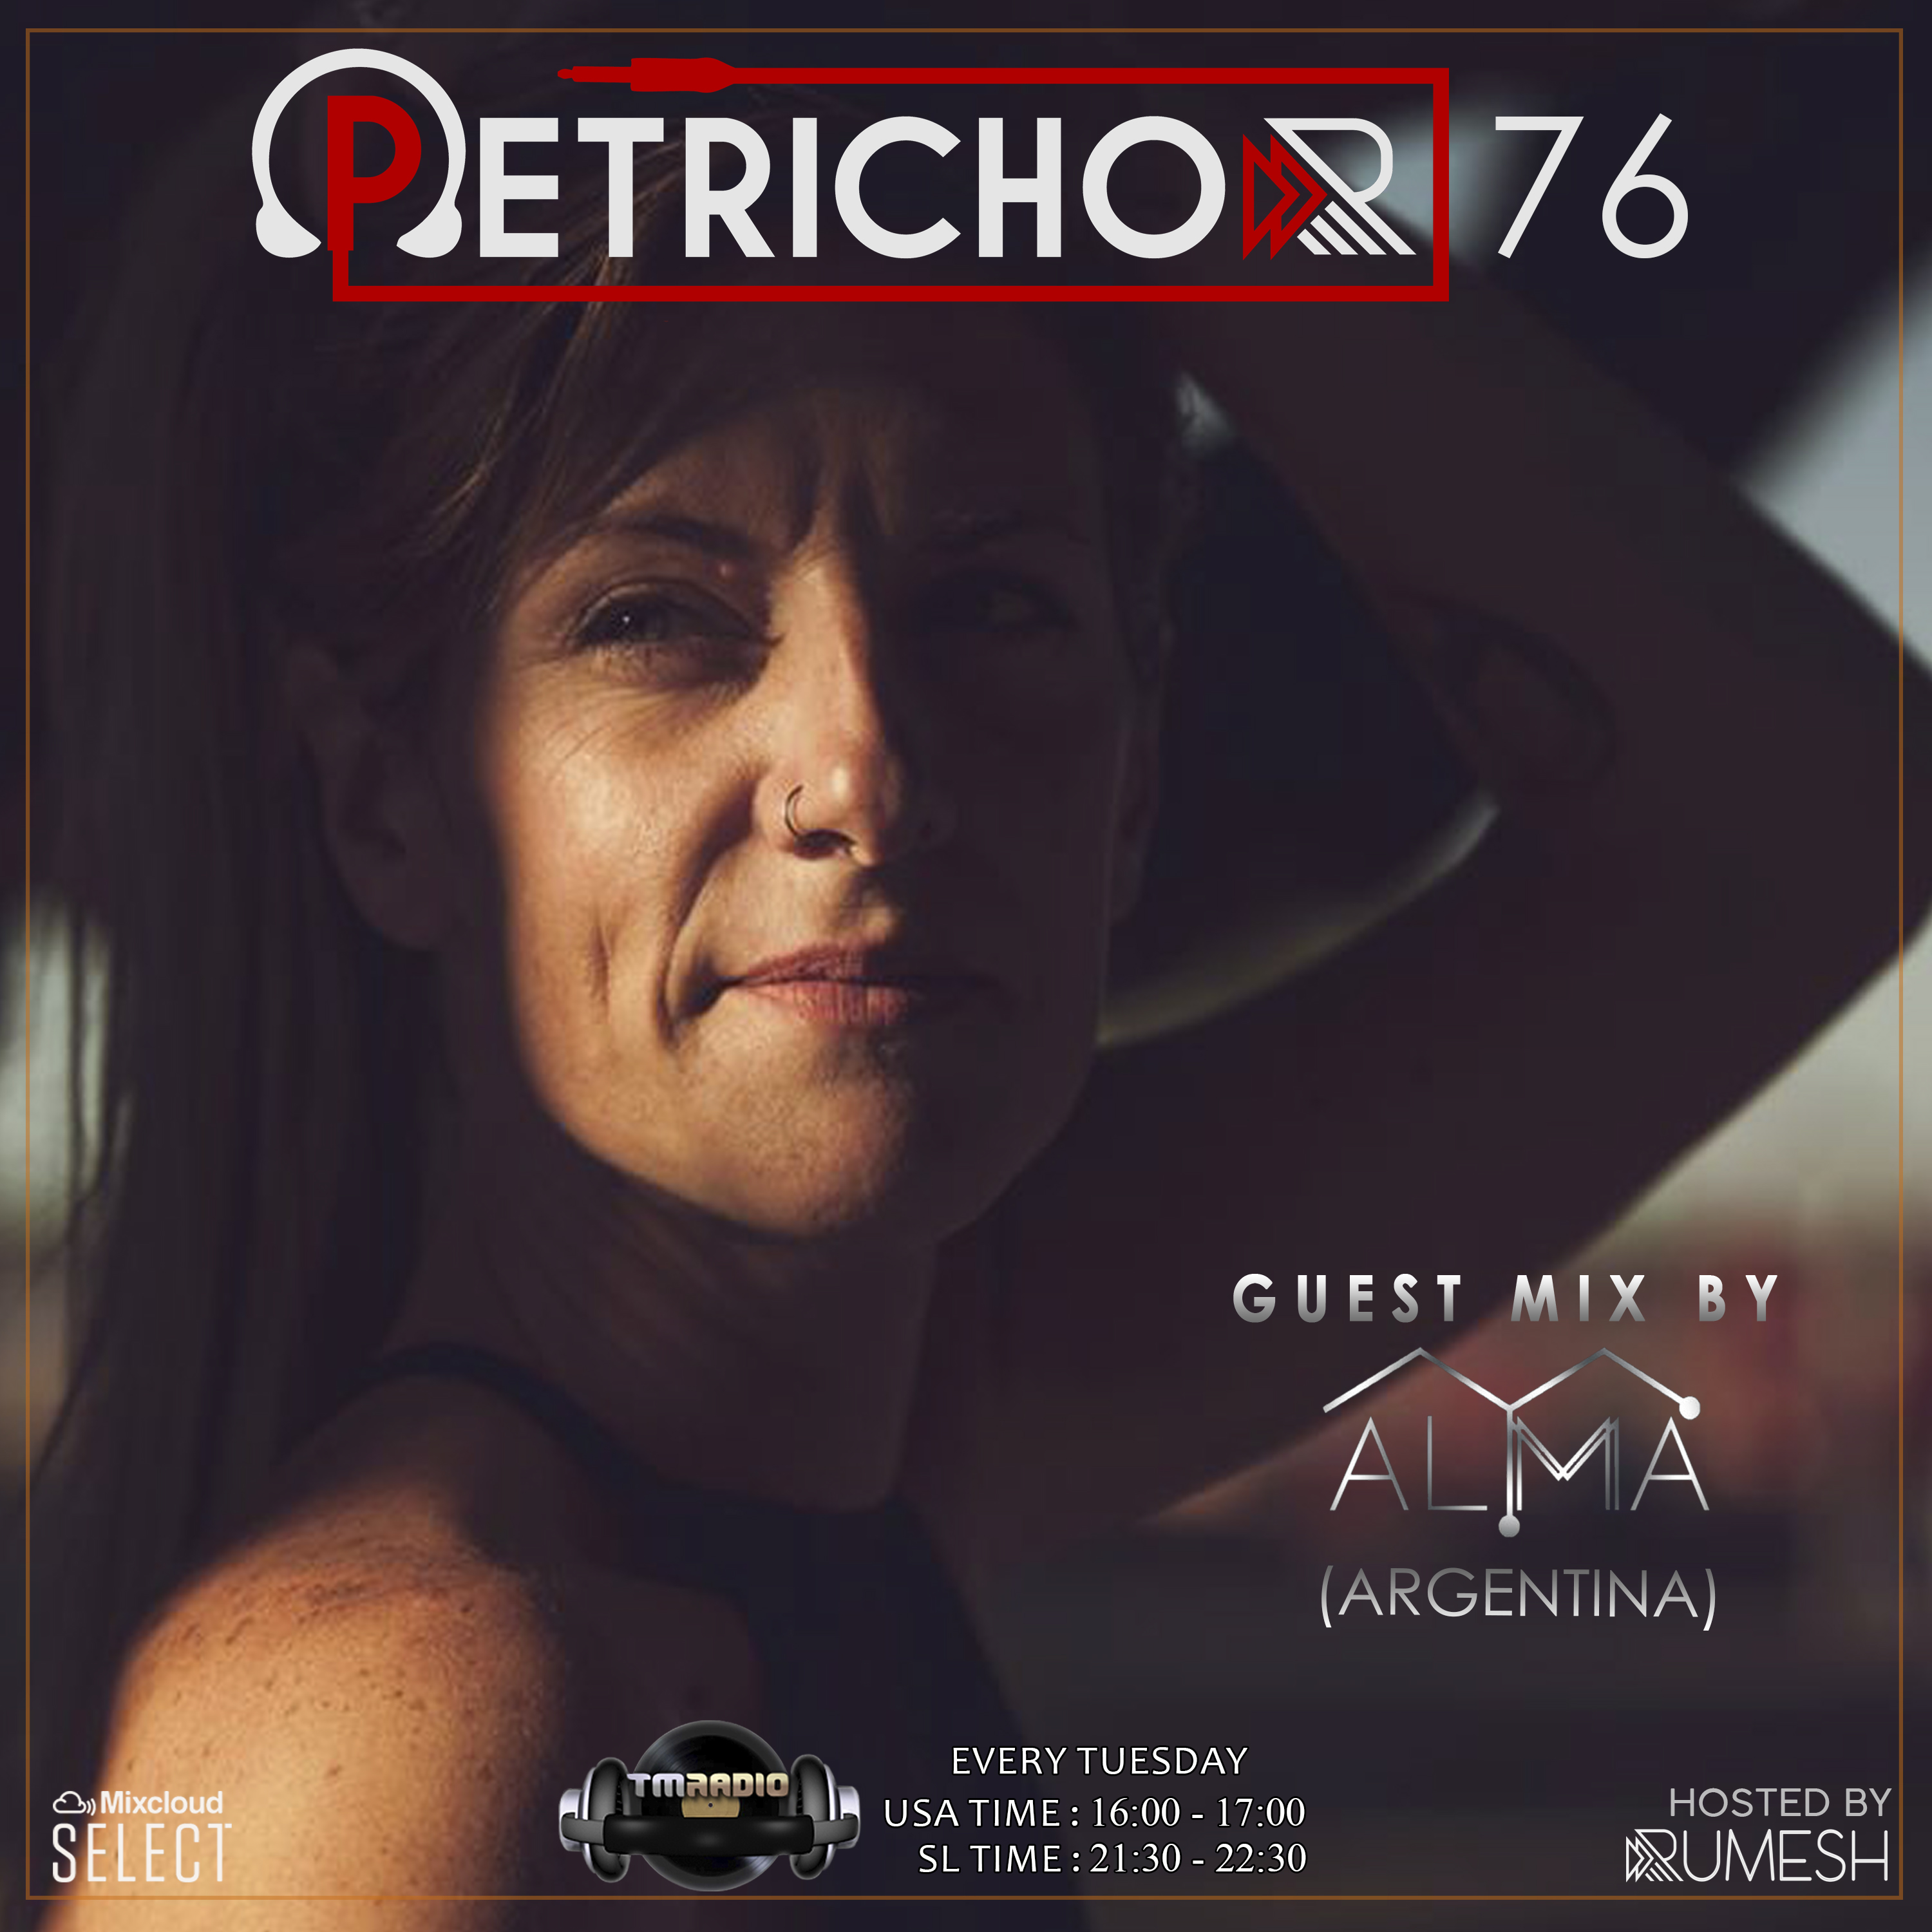 Petrichor 76 Guest Mix by Alma (Argentina) (from April 21st, 2020)